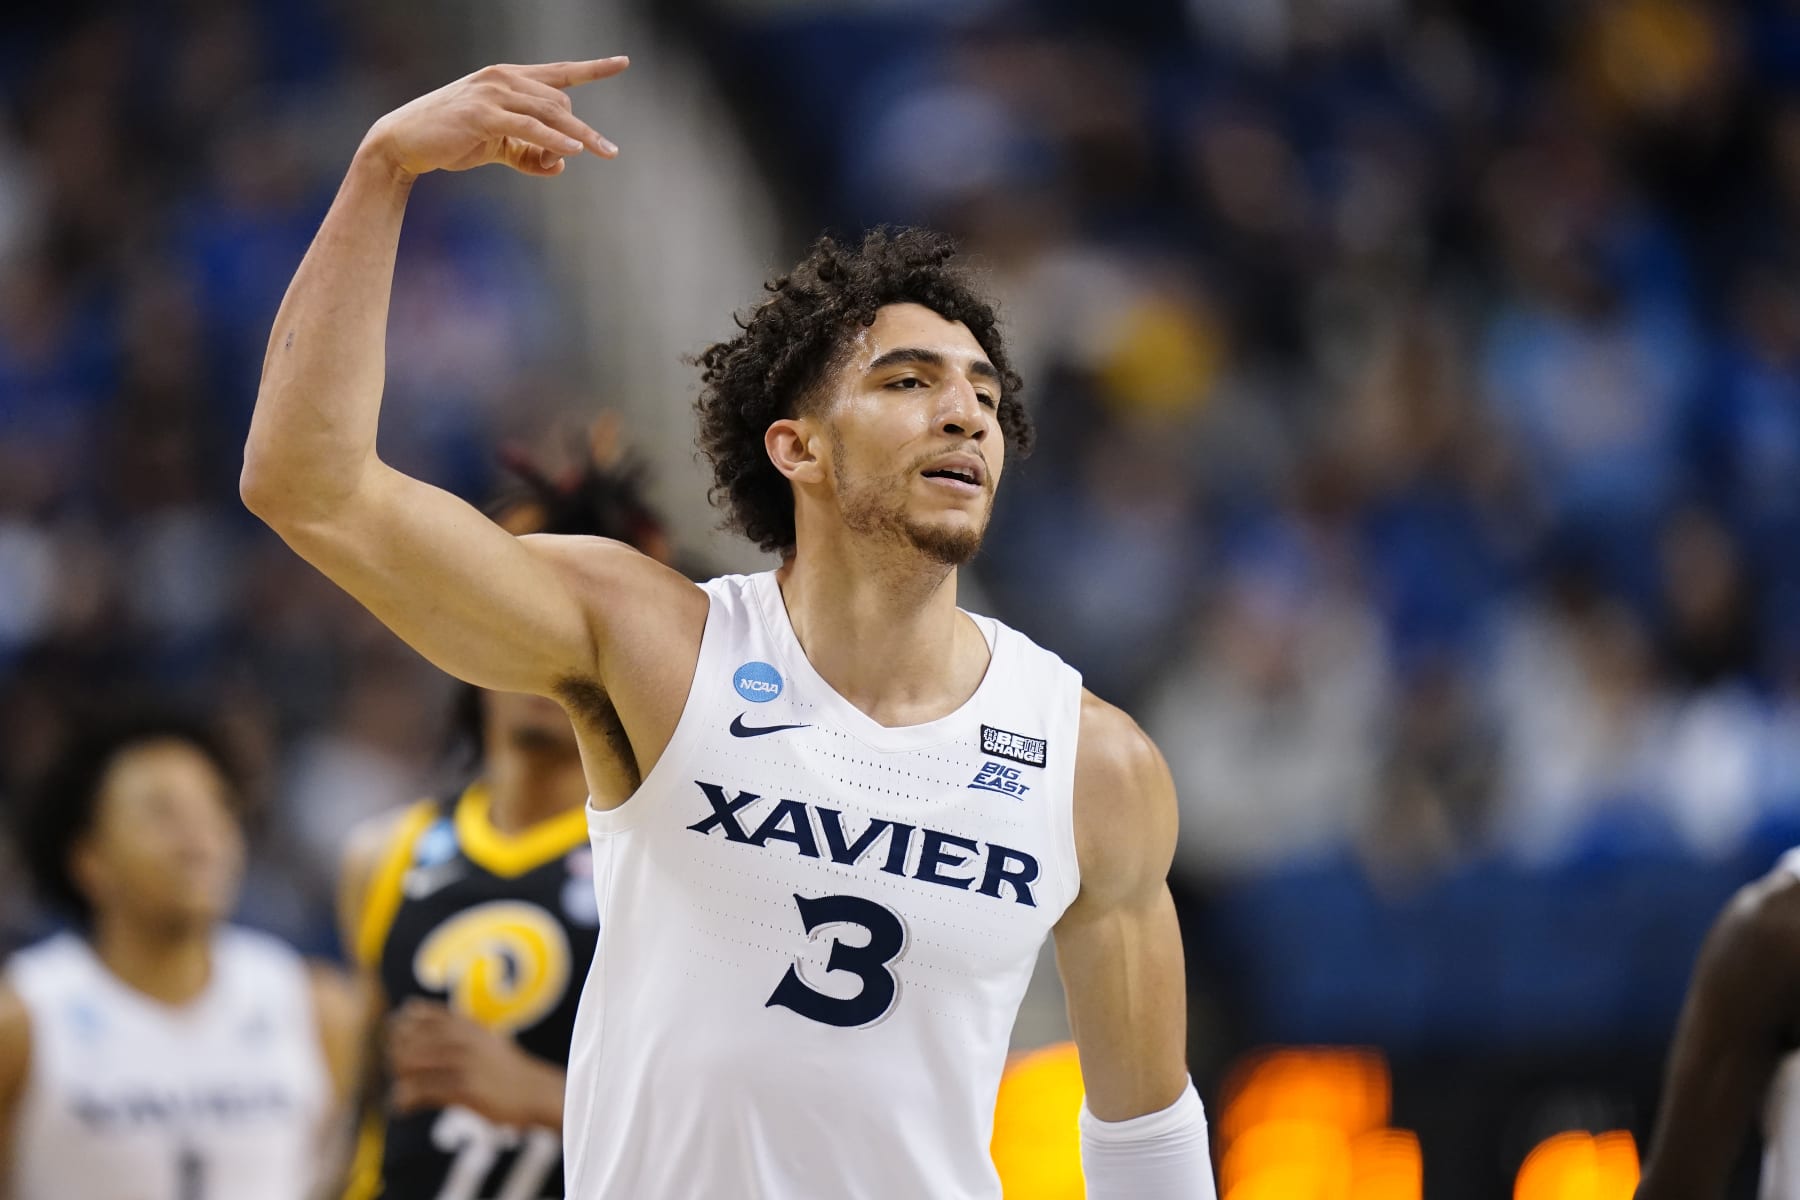 March Madness: NBA draft prospects who improved stock in tournament